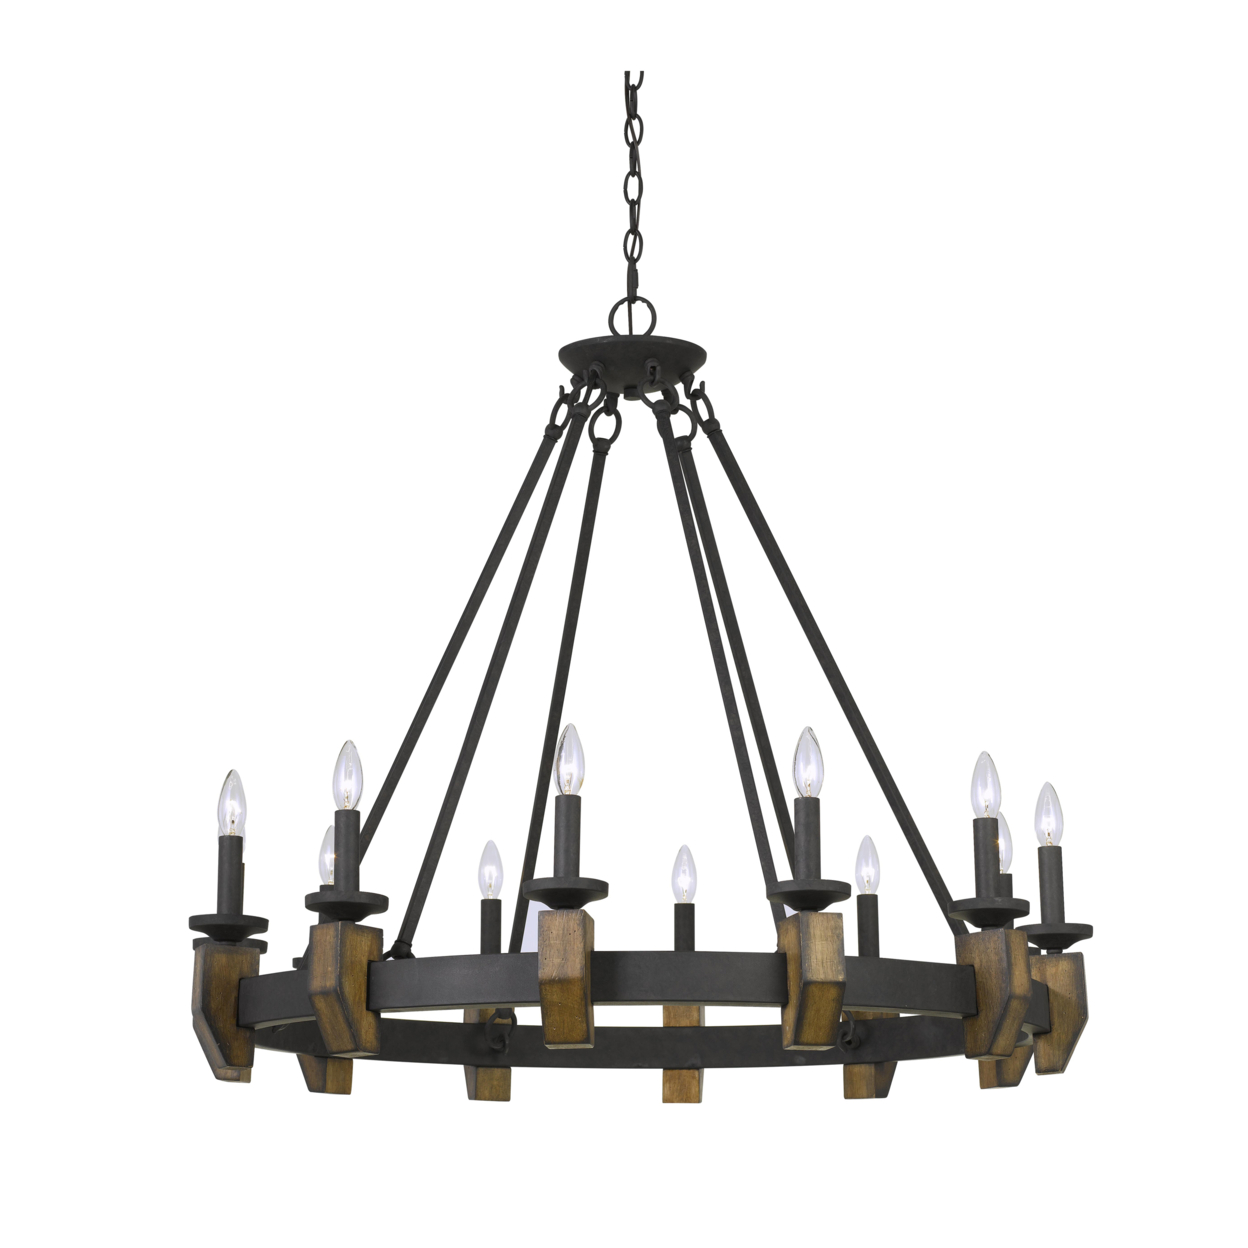 12 Bulb Round Metal Chandelier With Candle Lights And Wooden Accents, Black- Saltoro Sherpi